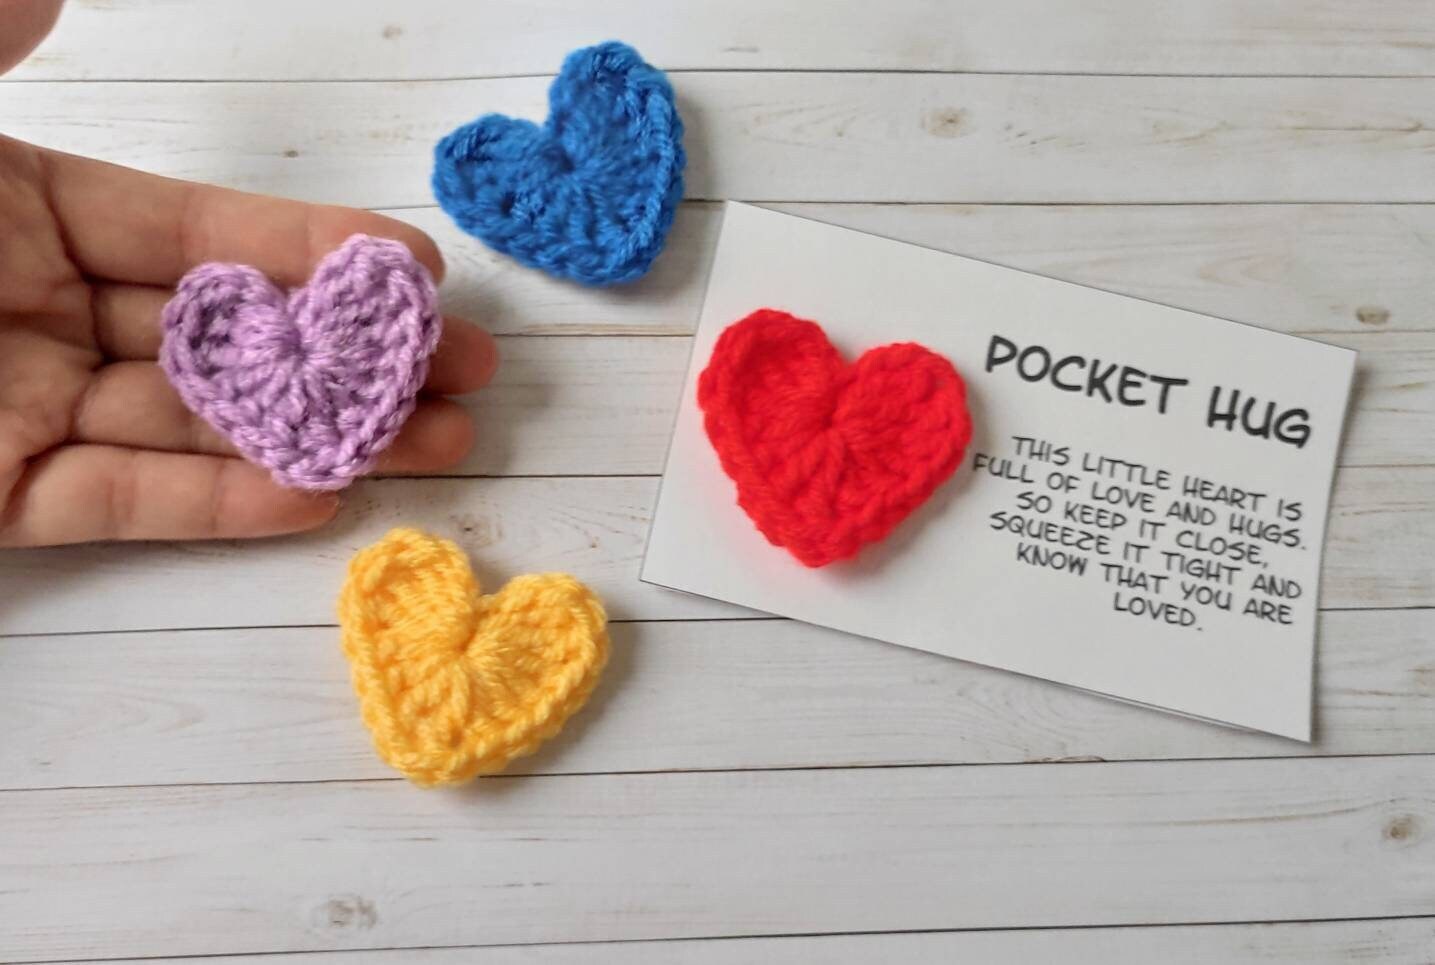 Pocket Hug Heart, Thoughtful Gift, Crochet Hug Gift, Special Friend, Miss  You Gift, Love You Gift, Thinking of You, First Day of School, Hug 